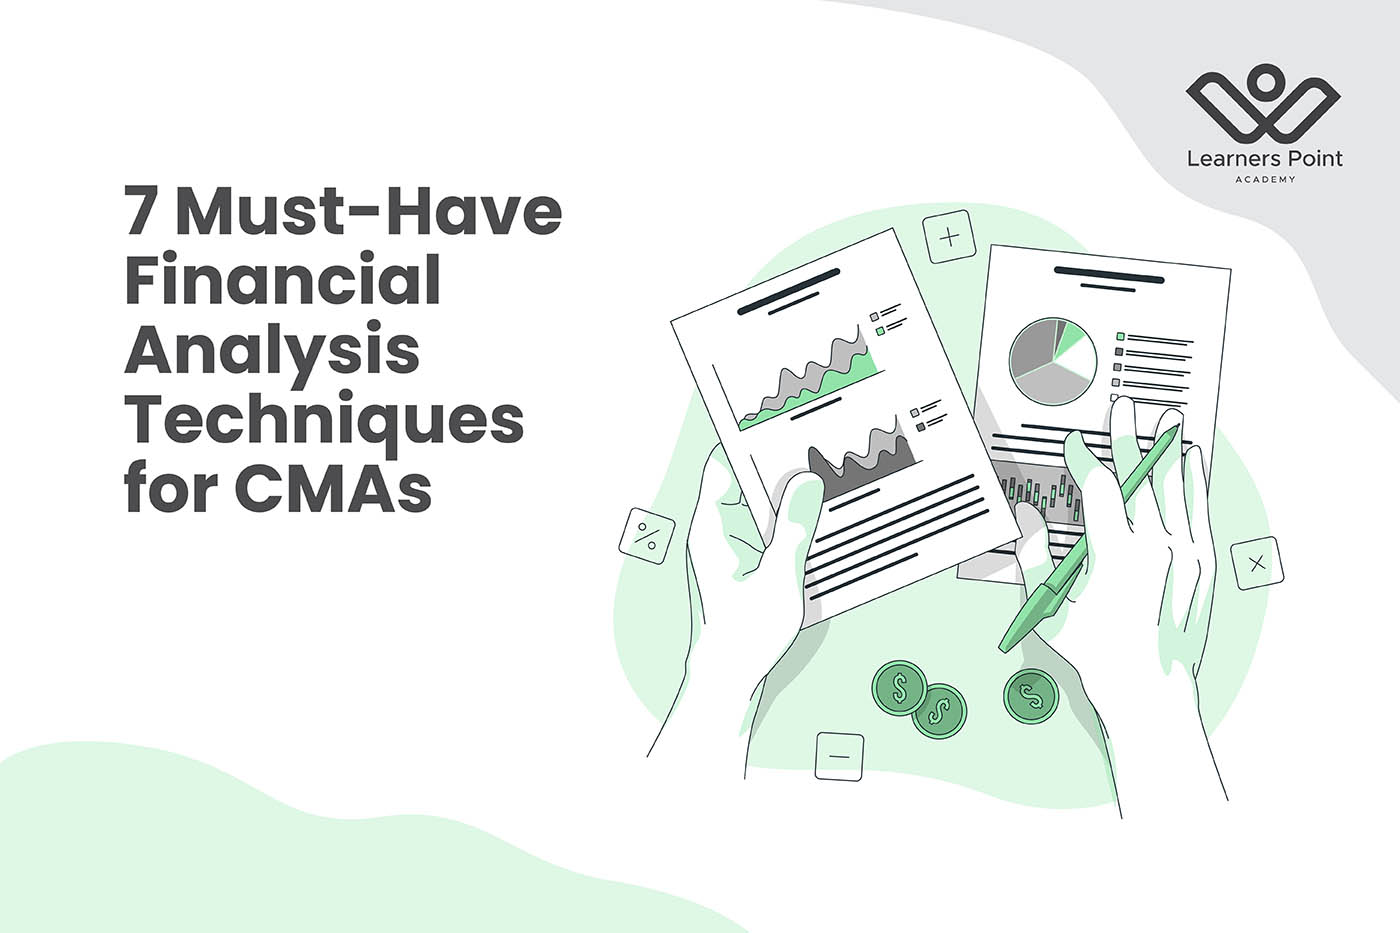 7 Must-Have Financial Analysis Techniques for CMAs